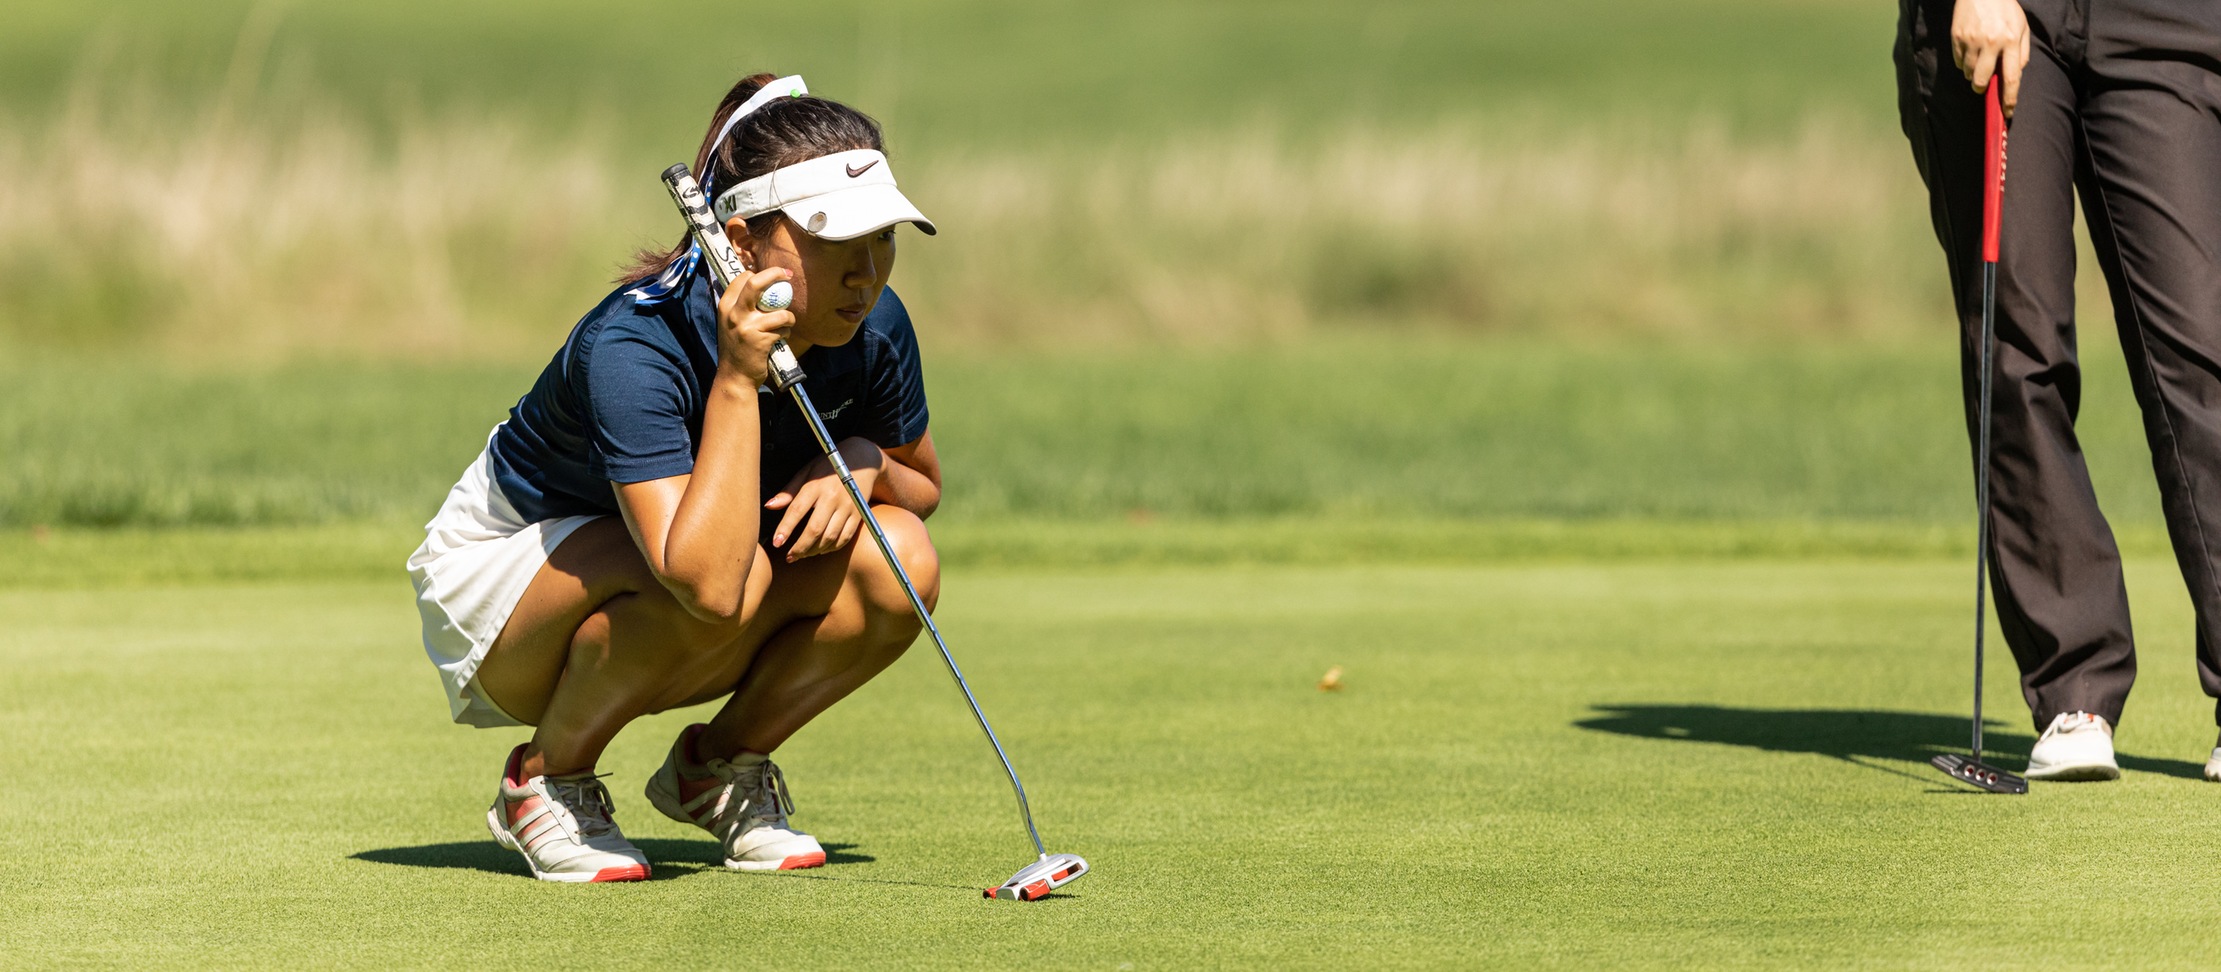 Golf Concludes Fall Season With Top-Five Finish at NYU Invitational